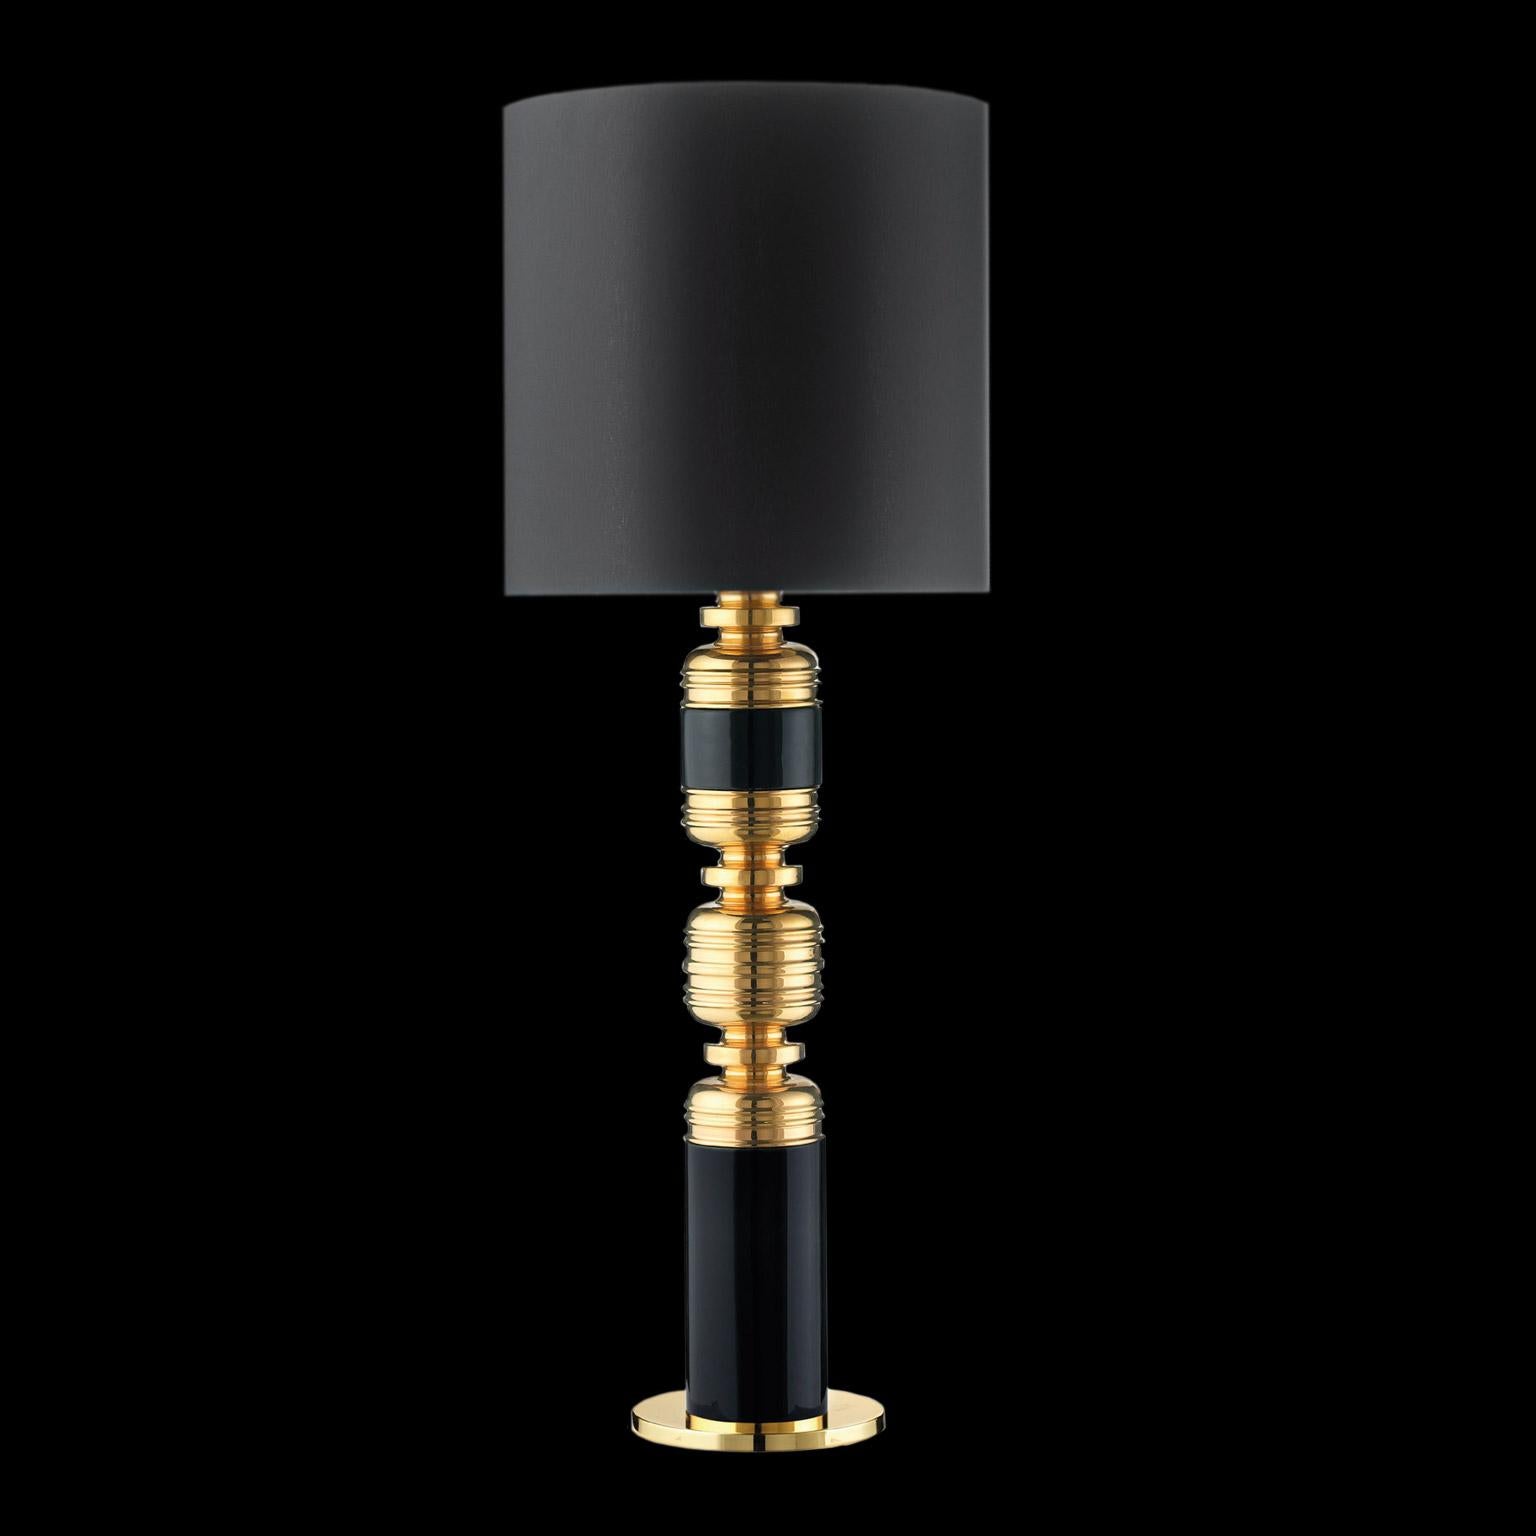 Ceramic lamp THEA 4 handcrafted in 24-karat gold 
combined with black enamel with cotton lampshade

cod. LT004
Measures: H. 123.0 cm. - Dm. 40.0 cm.